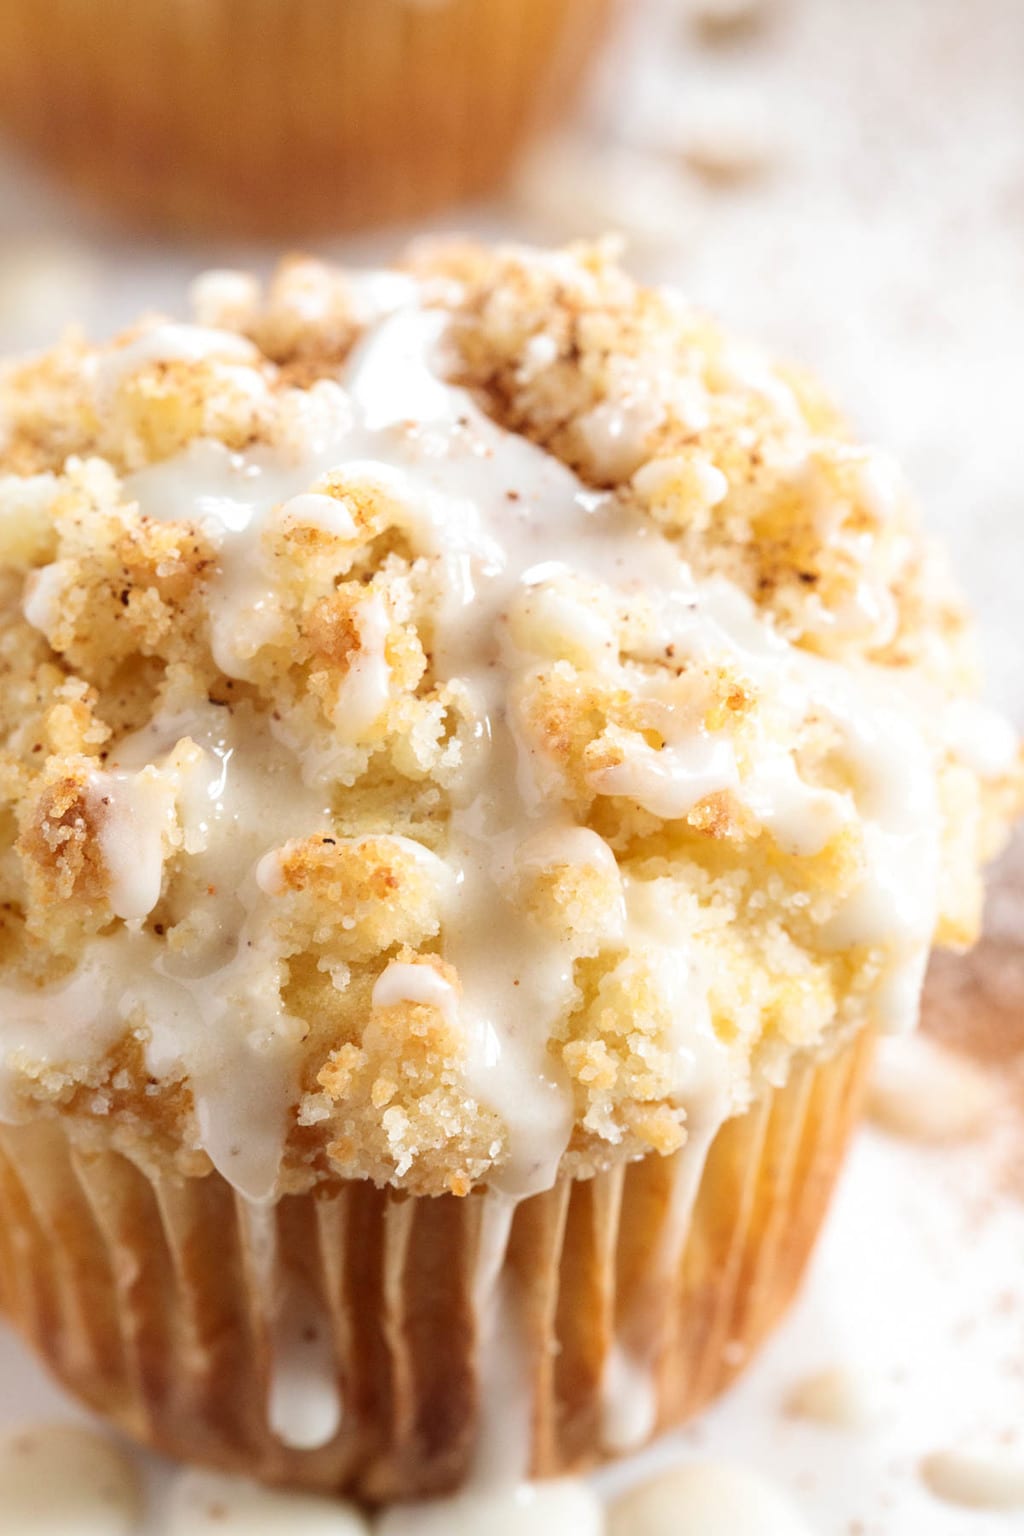 Vertical extreme closeup photo of a Eggnog Crumble Muffin on a white marble surface.